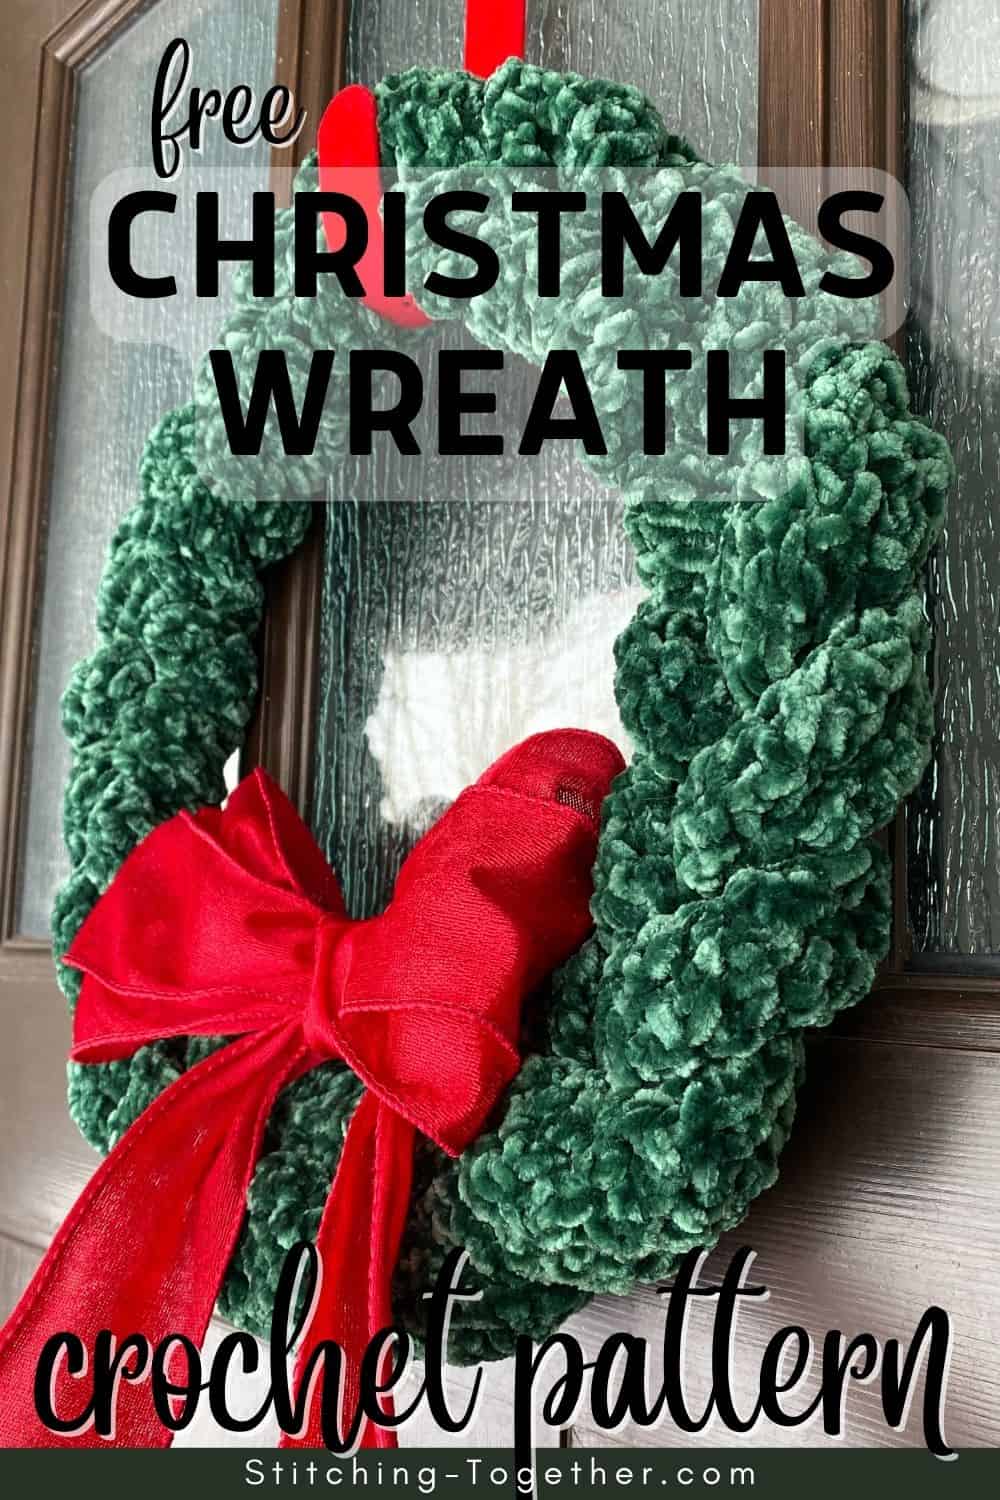 graphic reading" free Christmas Wreath Crochet pattern" with image of green braided crochet wreath and a red bow